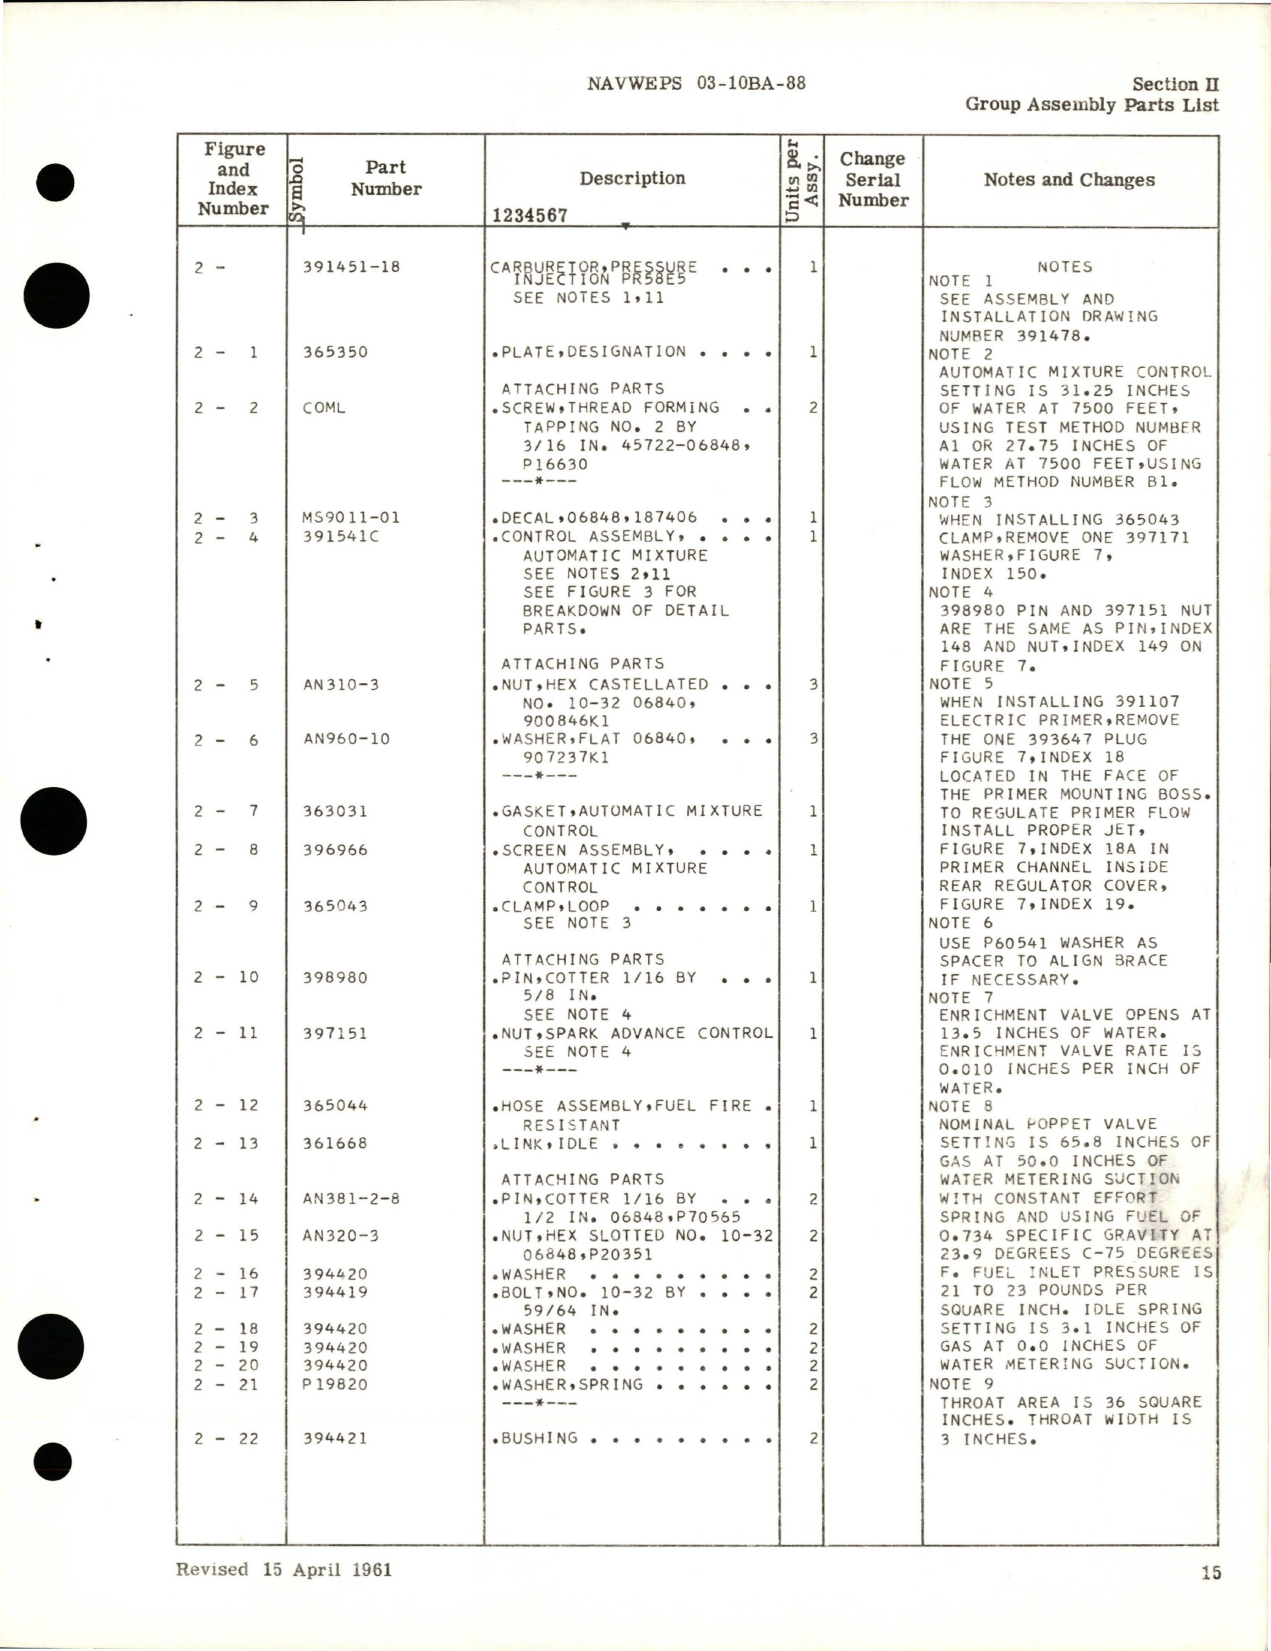 Sample page 9 from AirCorps Library document: Illustrated Parts Breakdown for Injection Carburetor - Model PR-58E5 